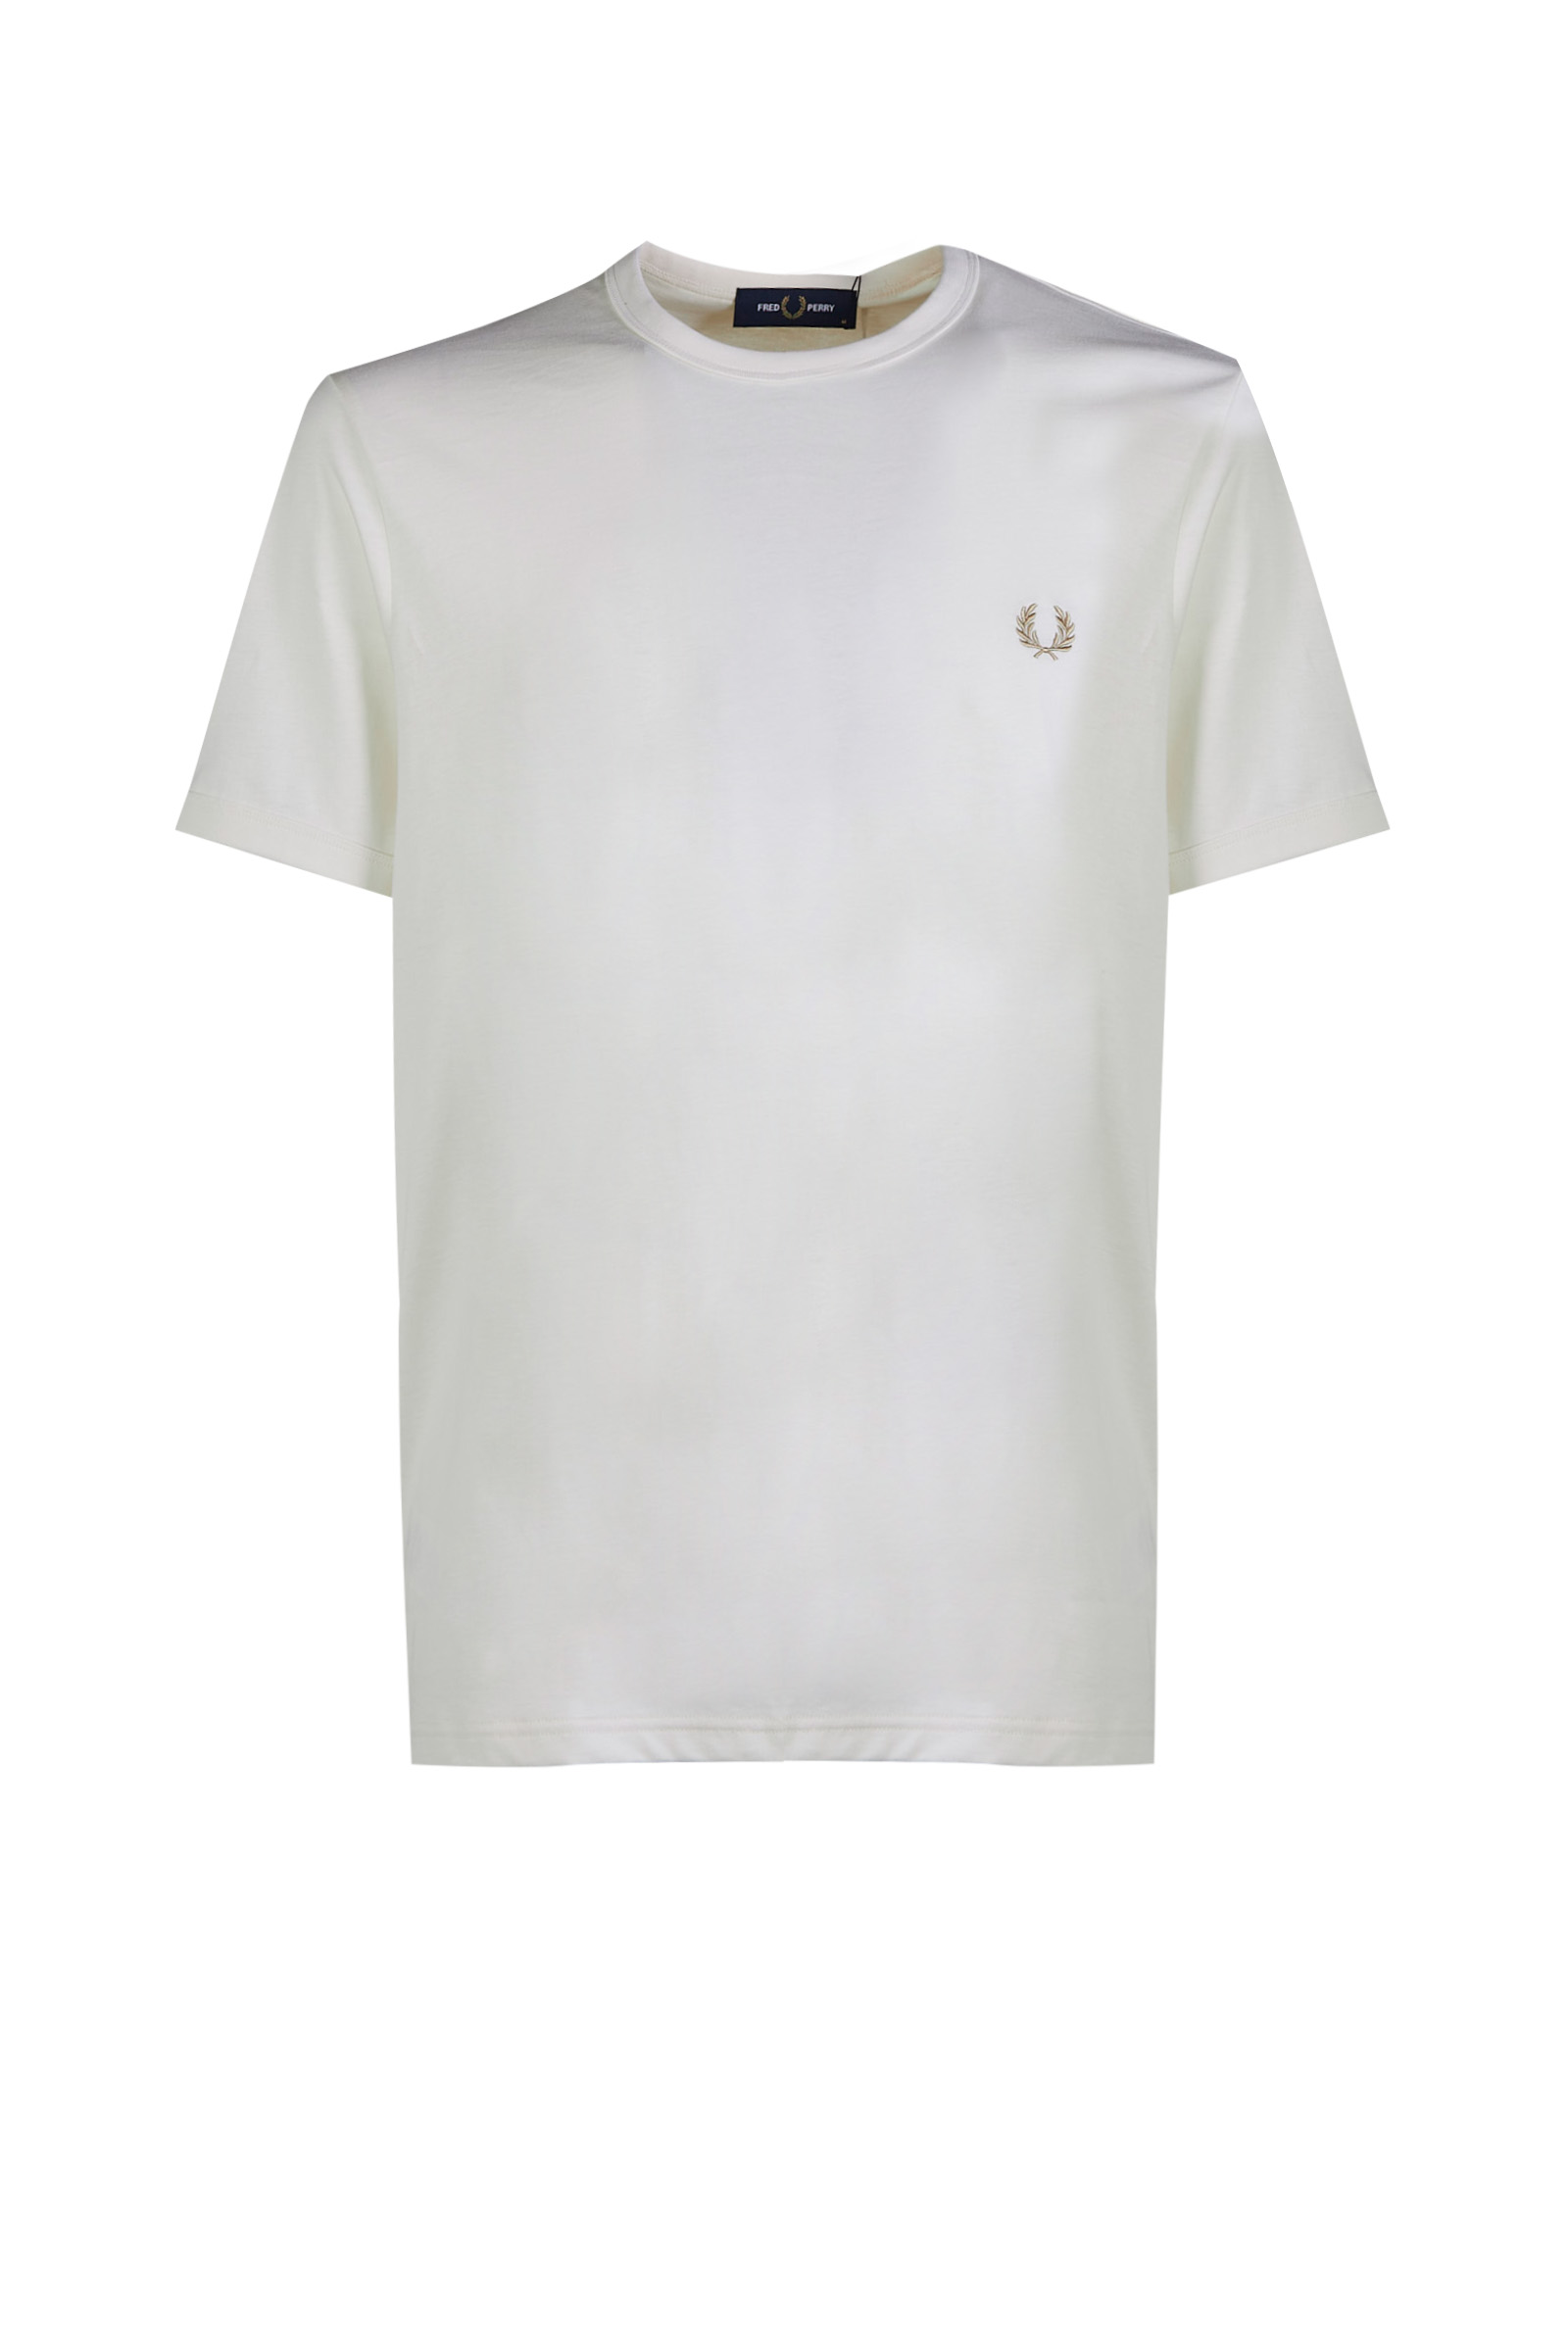 FRED PERRY T-SHIRT M3519 T-RINGER S64 PANNA UOMO